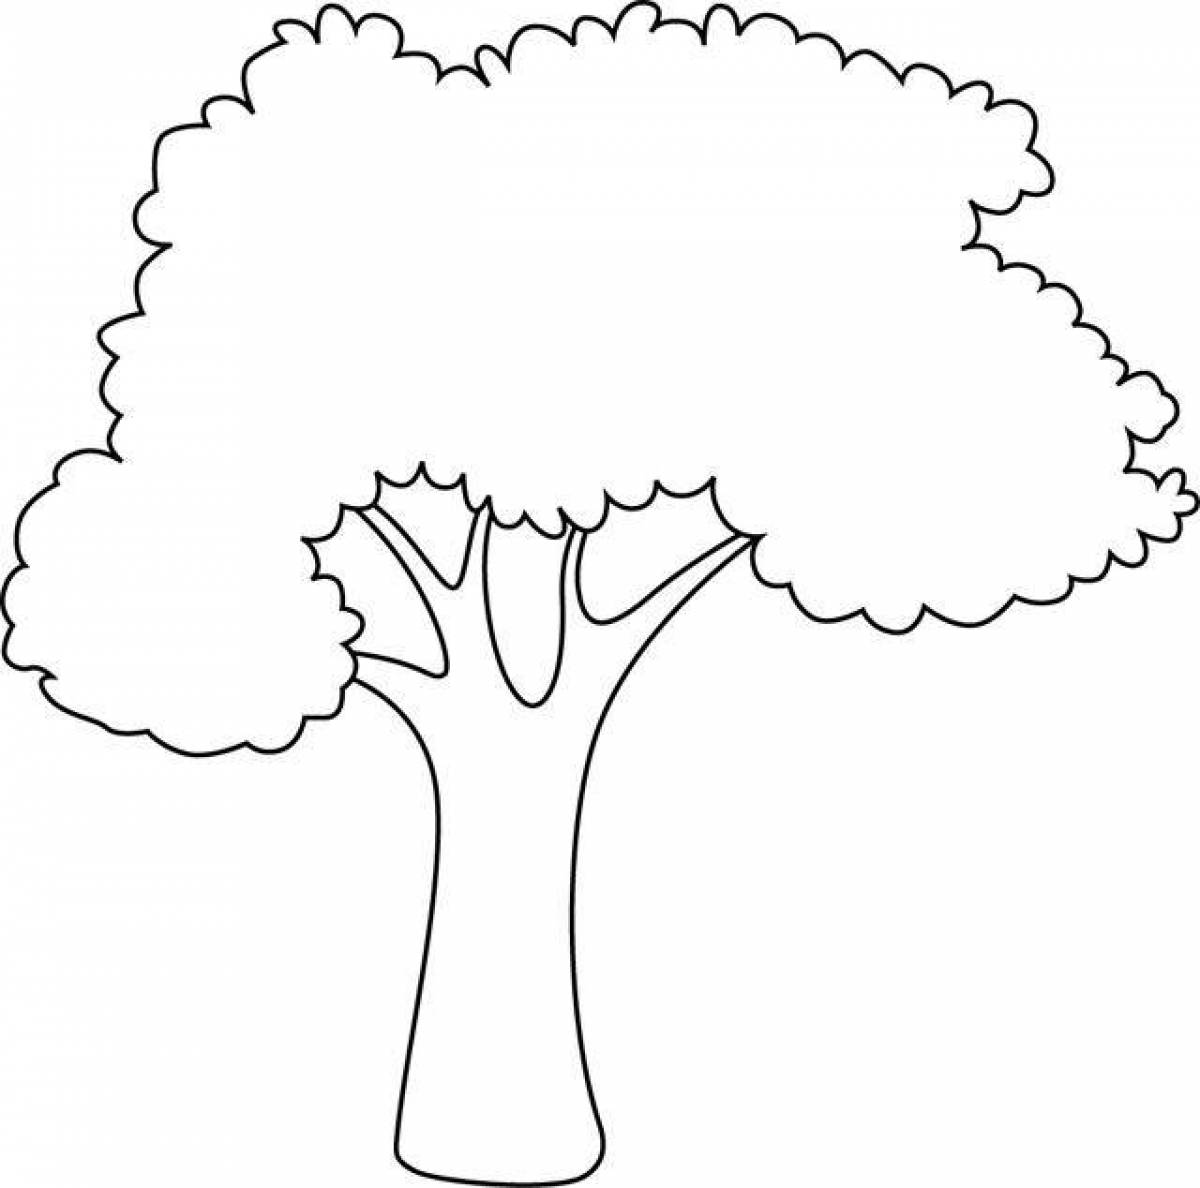 Coloring Pages Tree for kids pattern (29 pcs) - download or print for ...